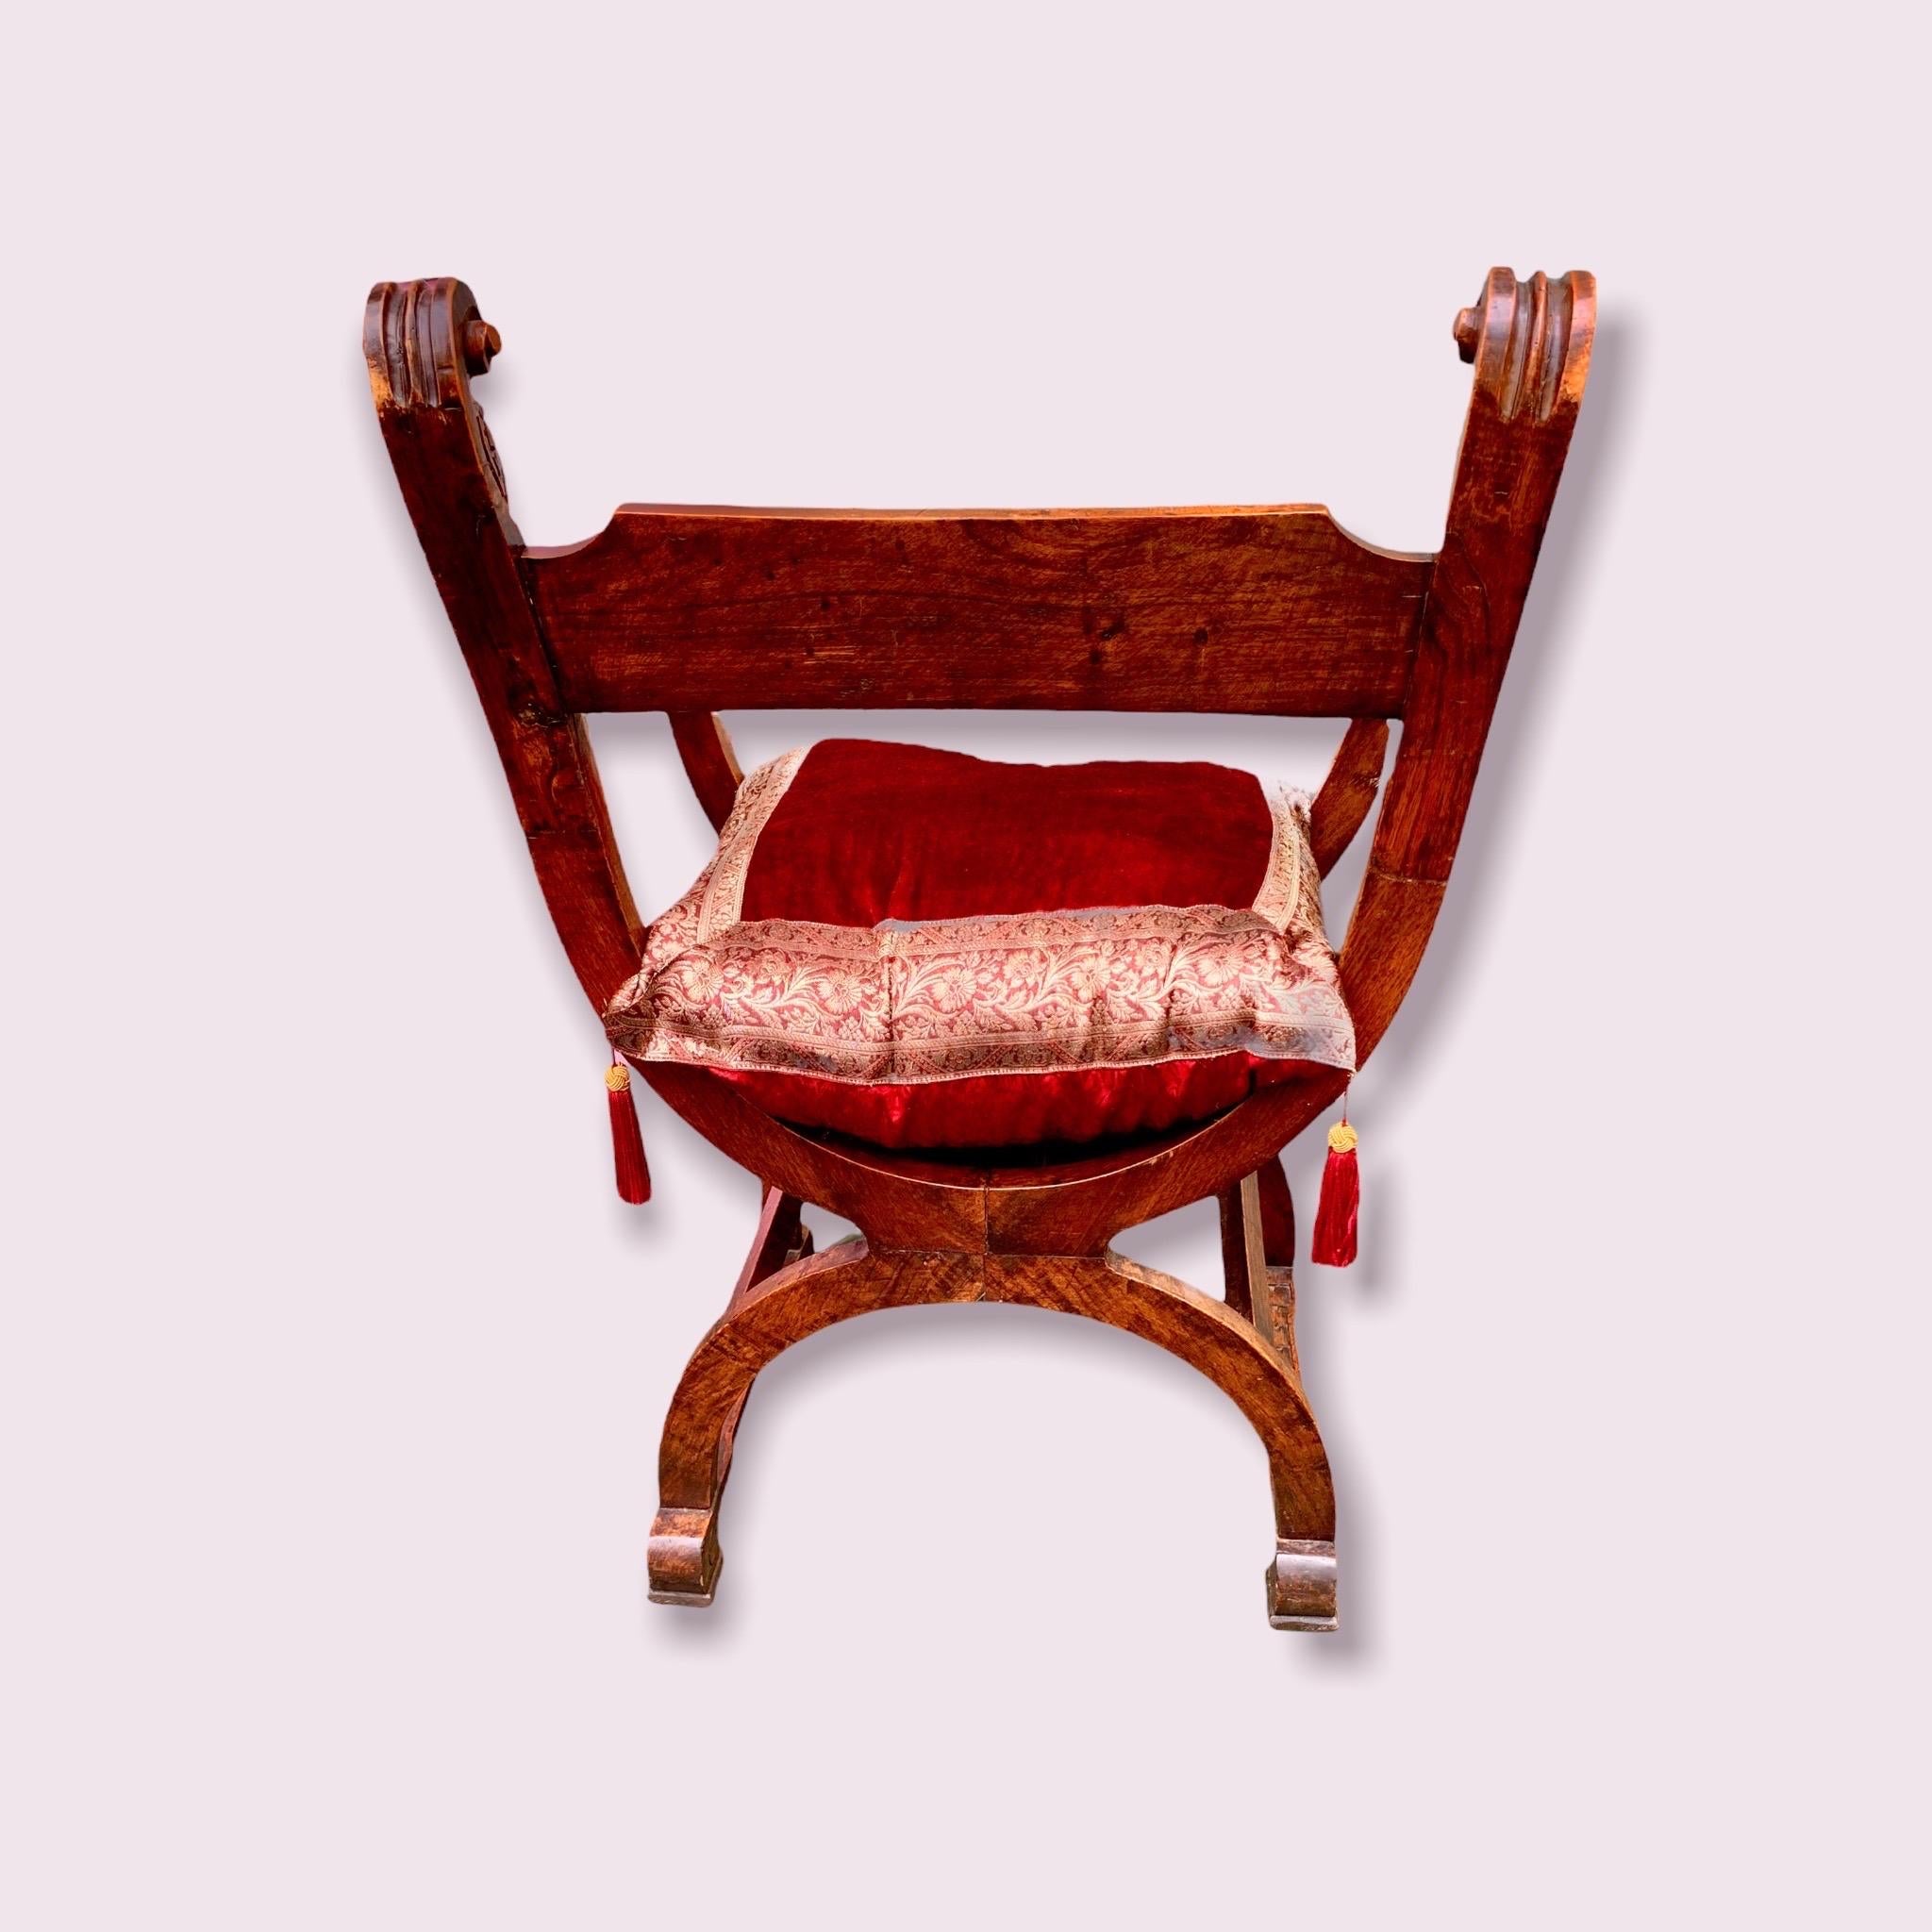 19th Century Antique European Carved Walnut Dante Chair For Sale